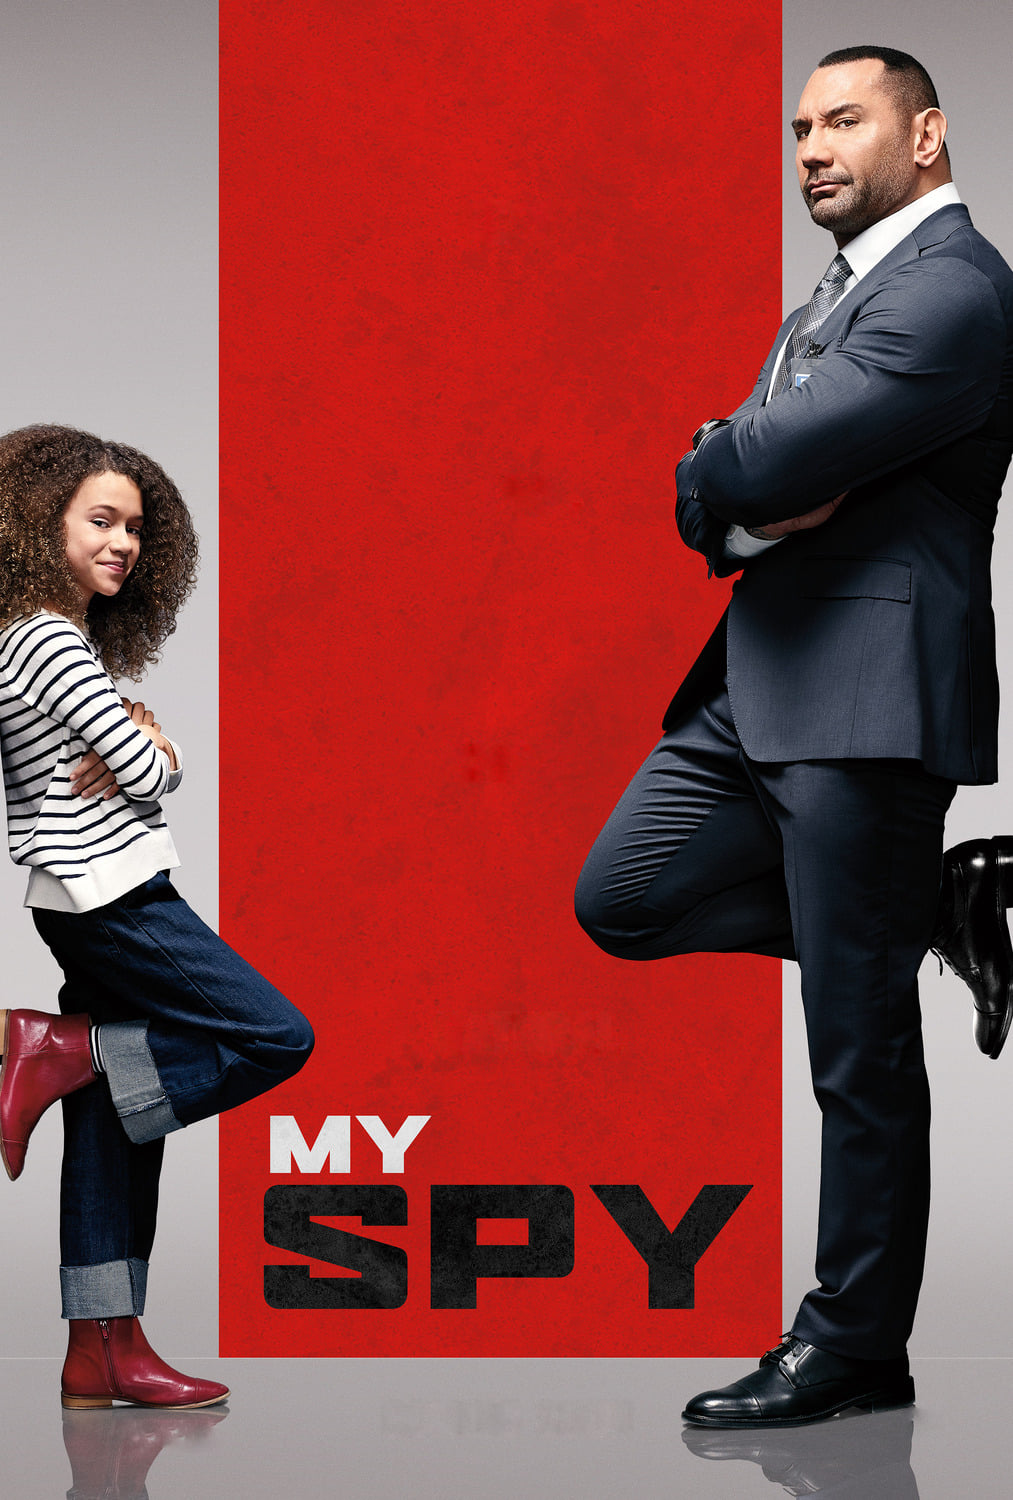 My Spy (2019) Official Trailer #1